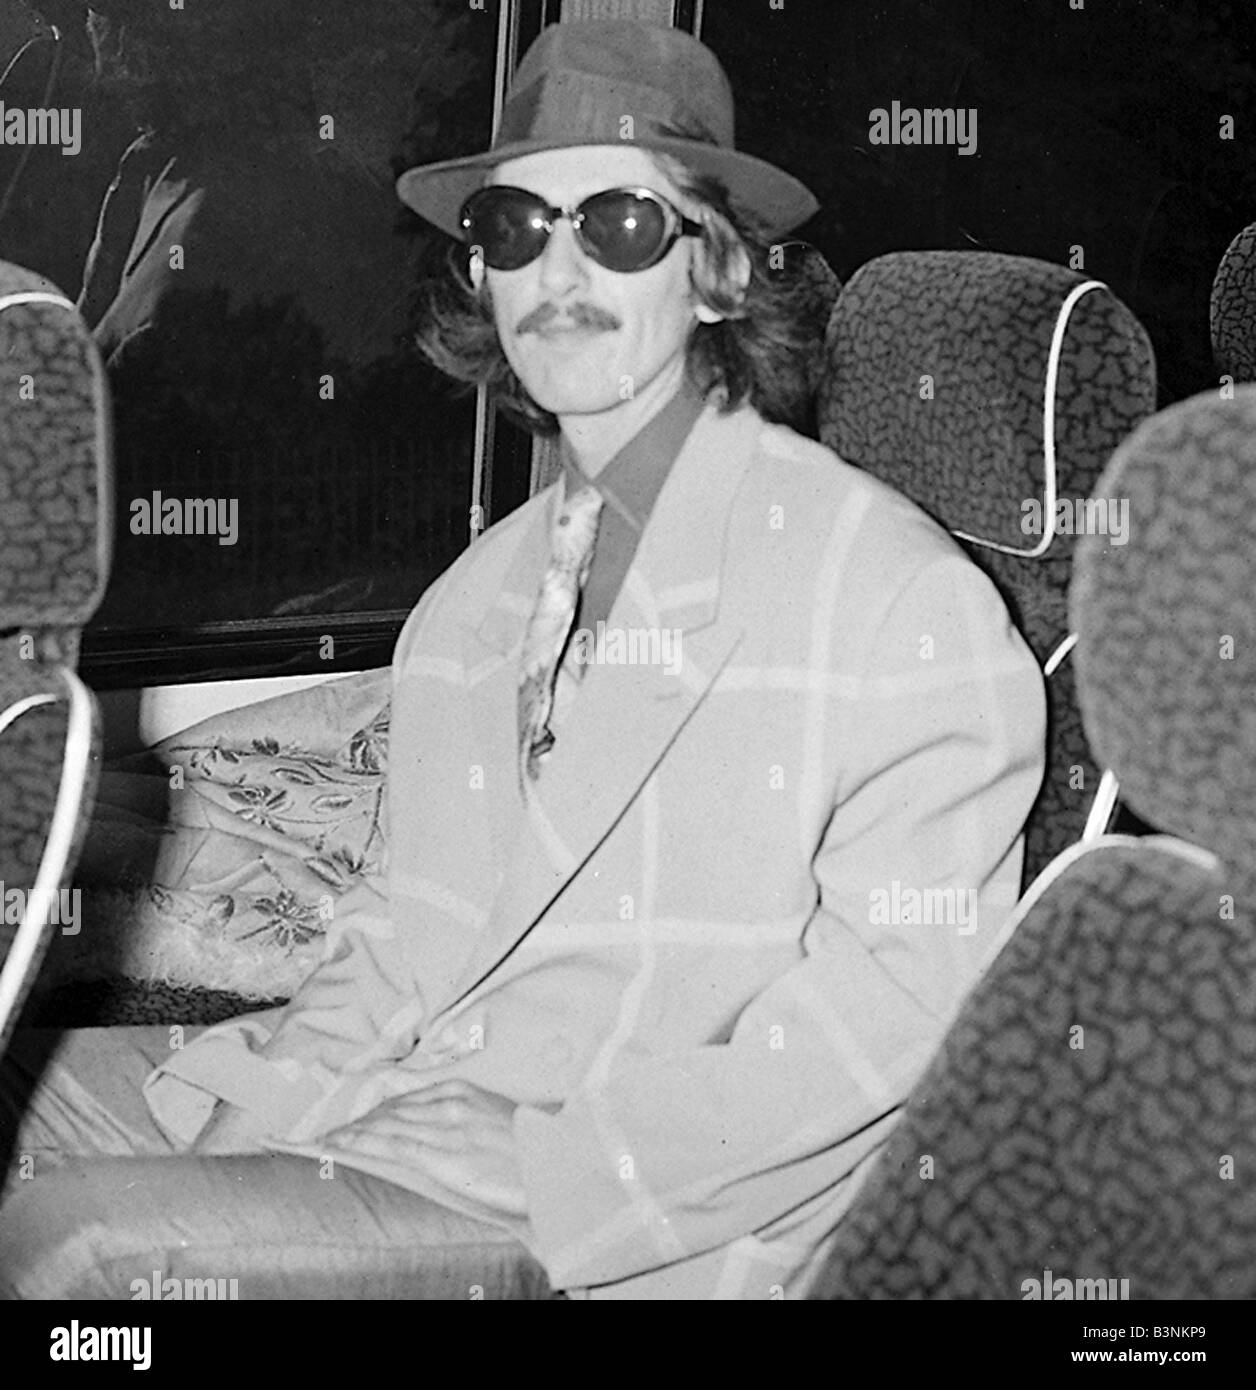 Beatles files 1967 George Harrison aboard Magical mystery tour bus September 1967 Stock Photo